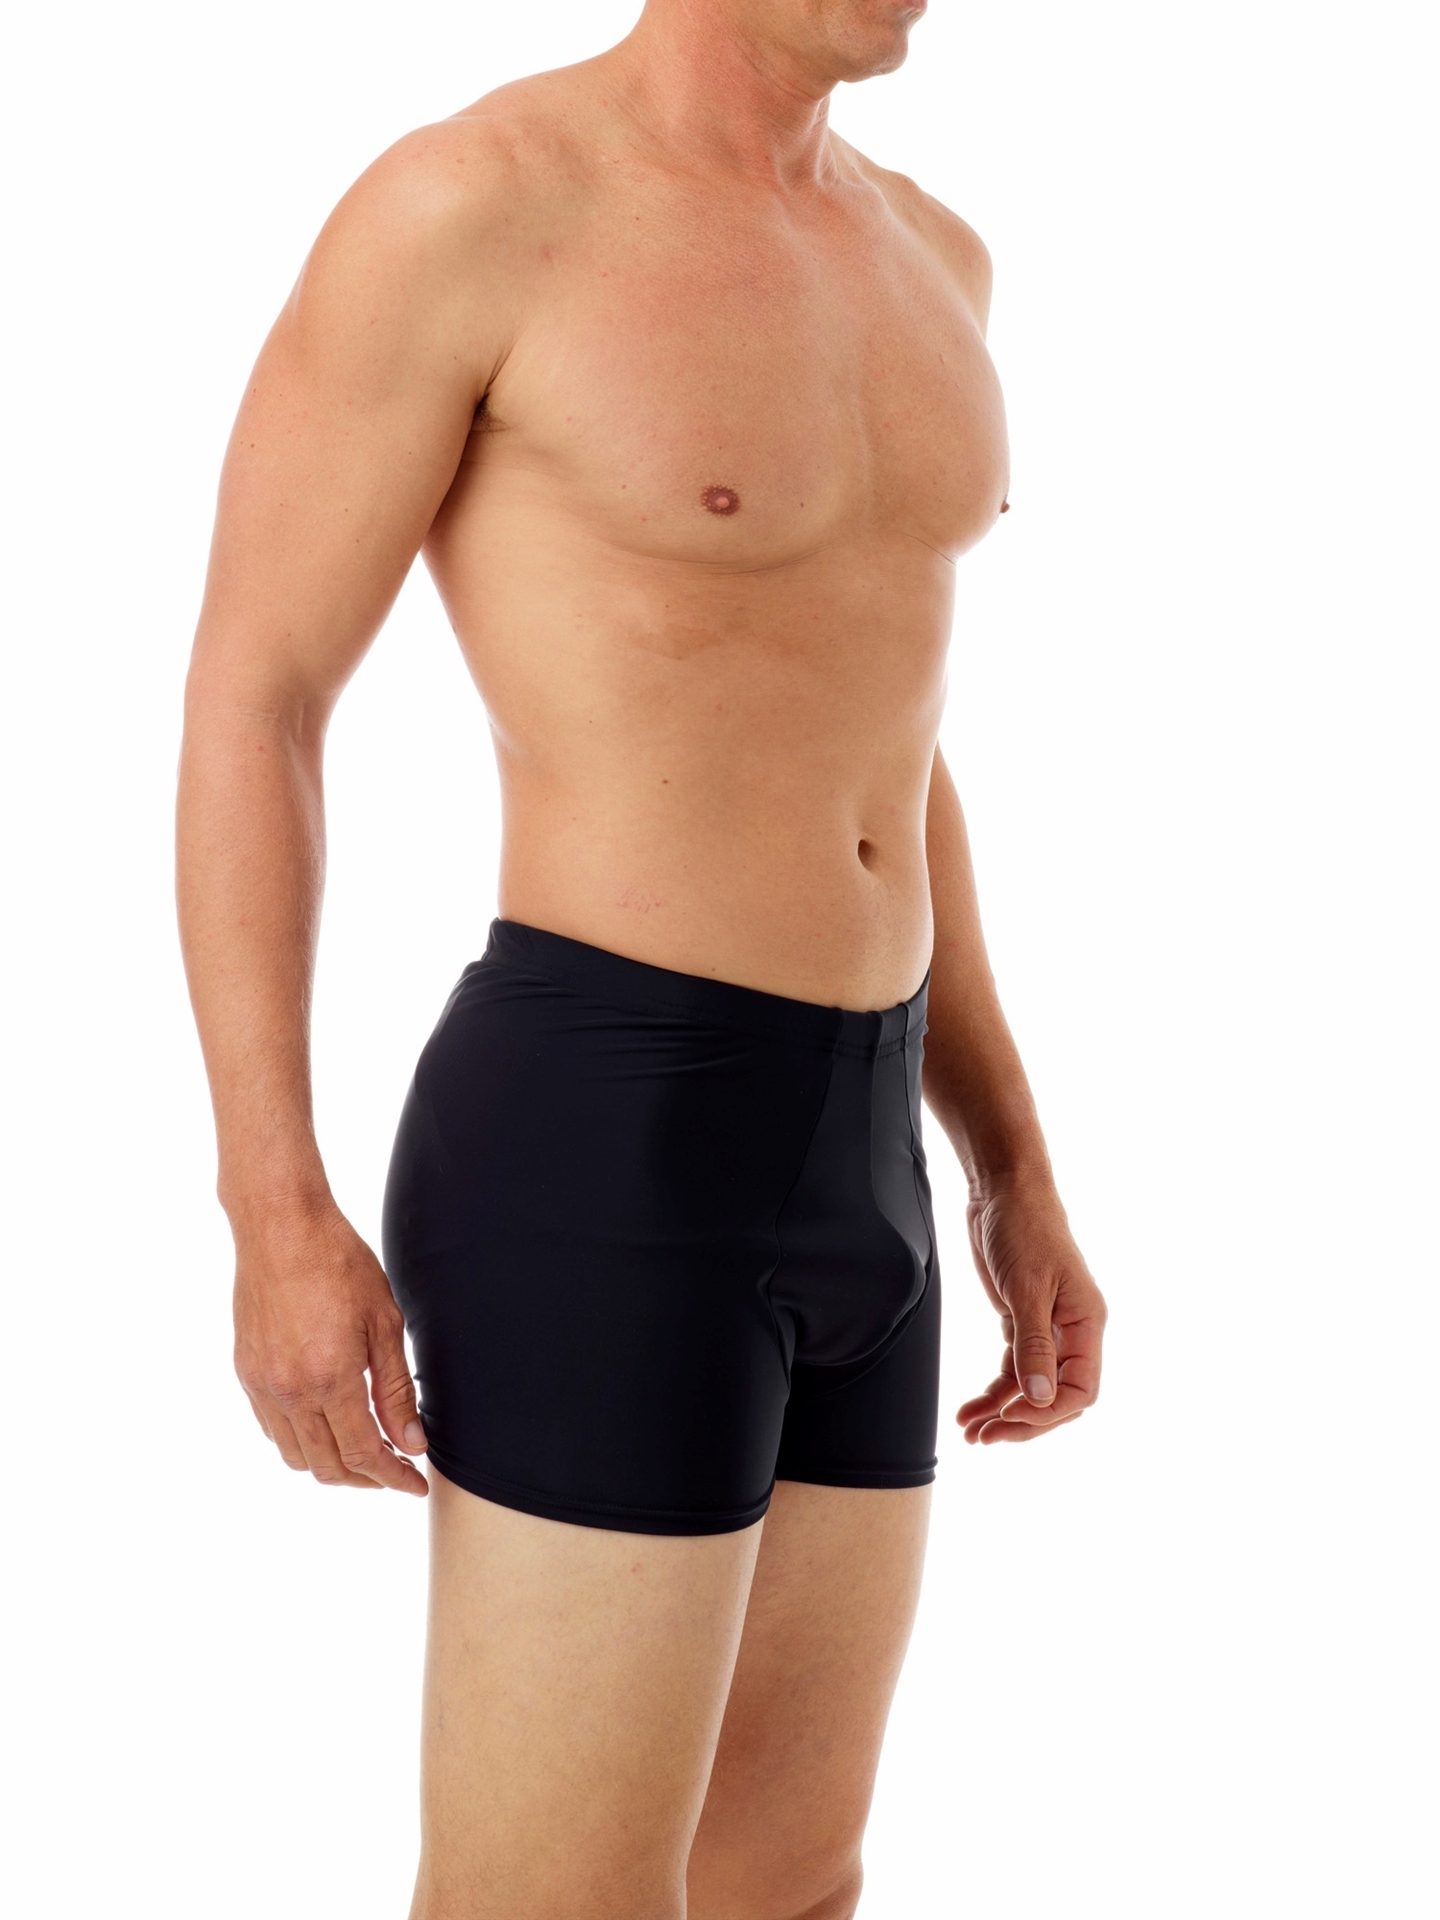 Padded Boxers. Men Compression Shirts, Girdles, Chest Binders, Hernia  Garments